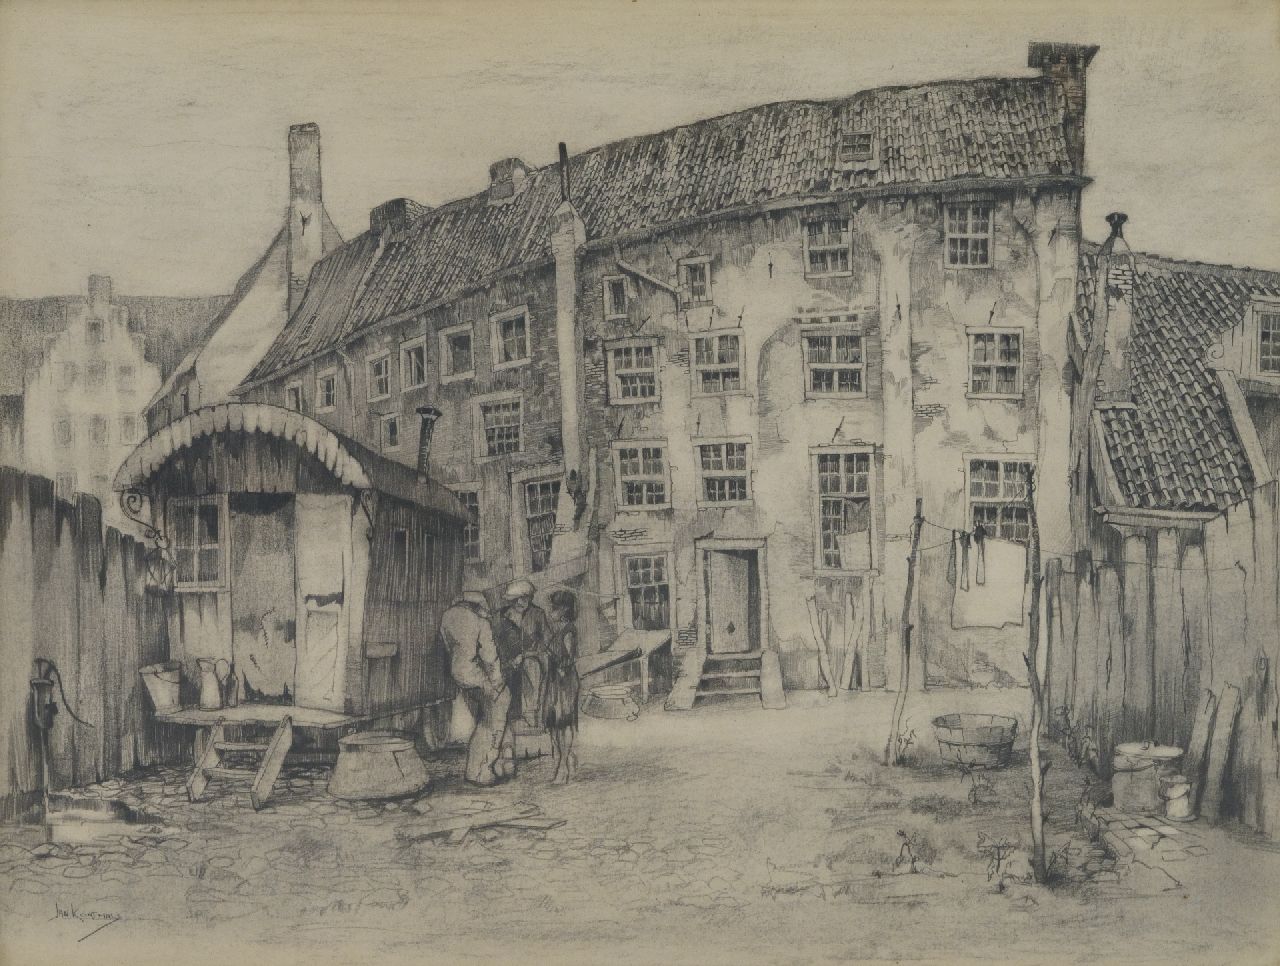 Korthals J.  | Johannes 'Jan' Korthals | Watercolours and drawings offered for sale | City wall houses in Amersfoort, drawing on paper 46.0 x 56.0 cm, gesigneerd linksonder